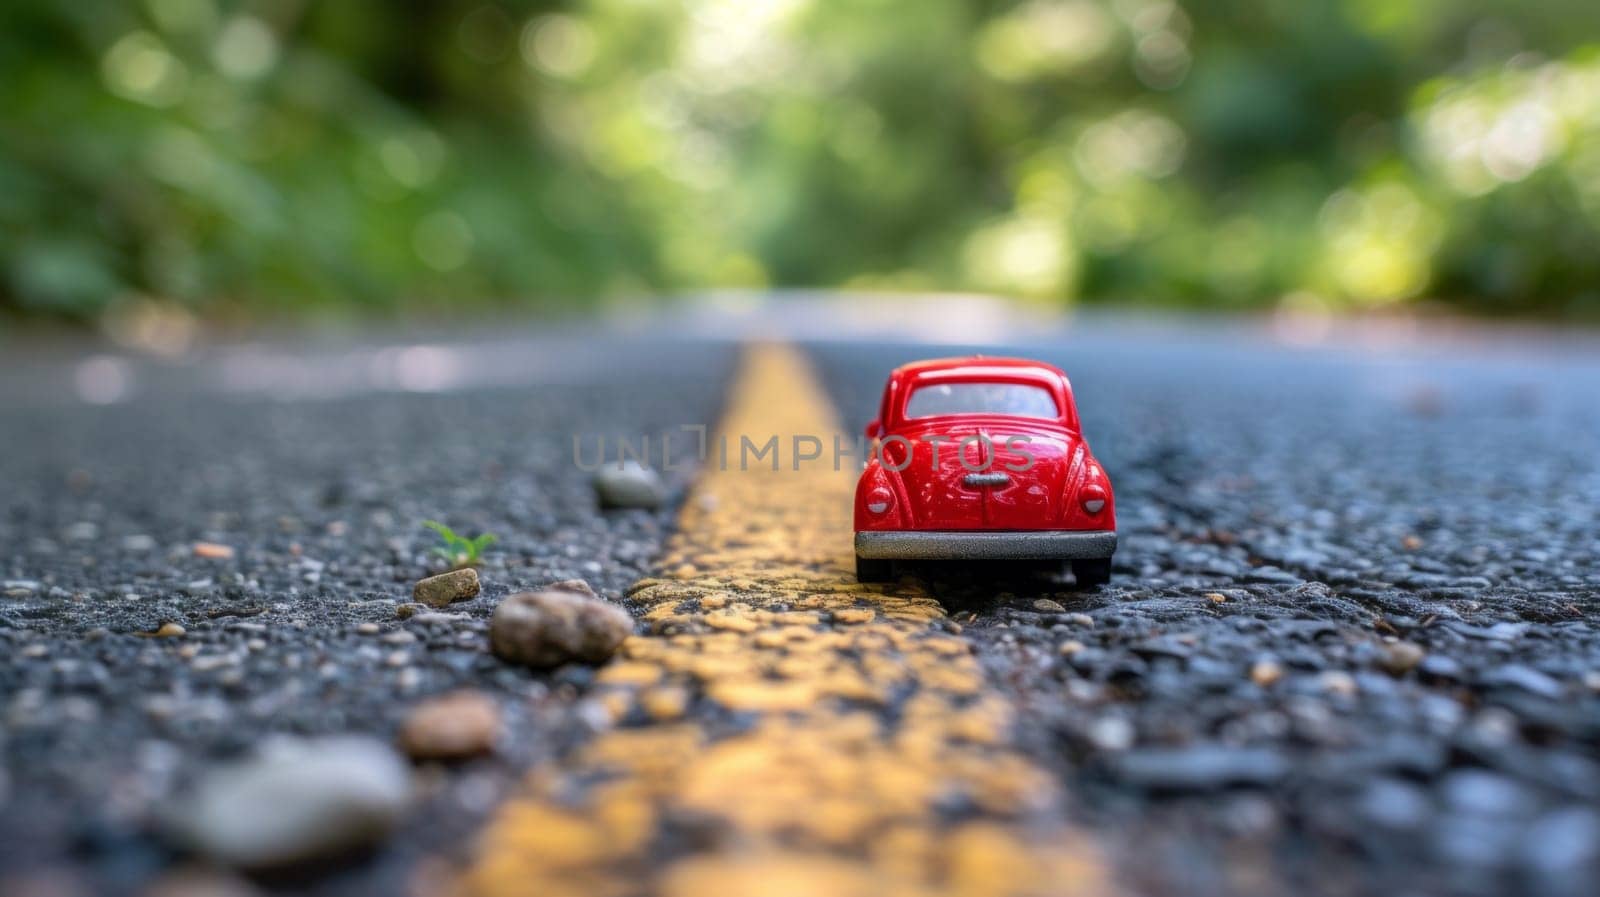 A red toy car is driving down a road with rocks and trees